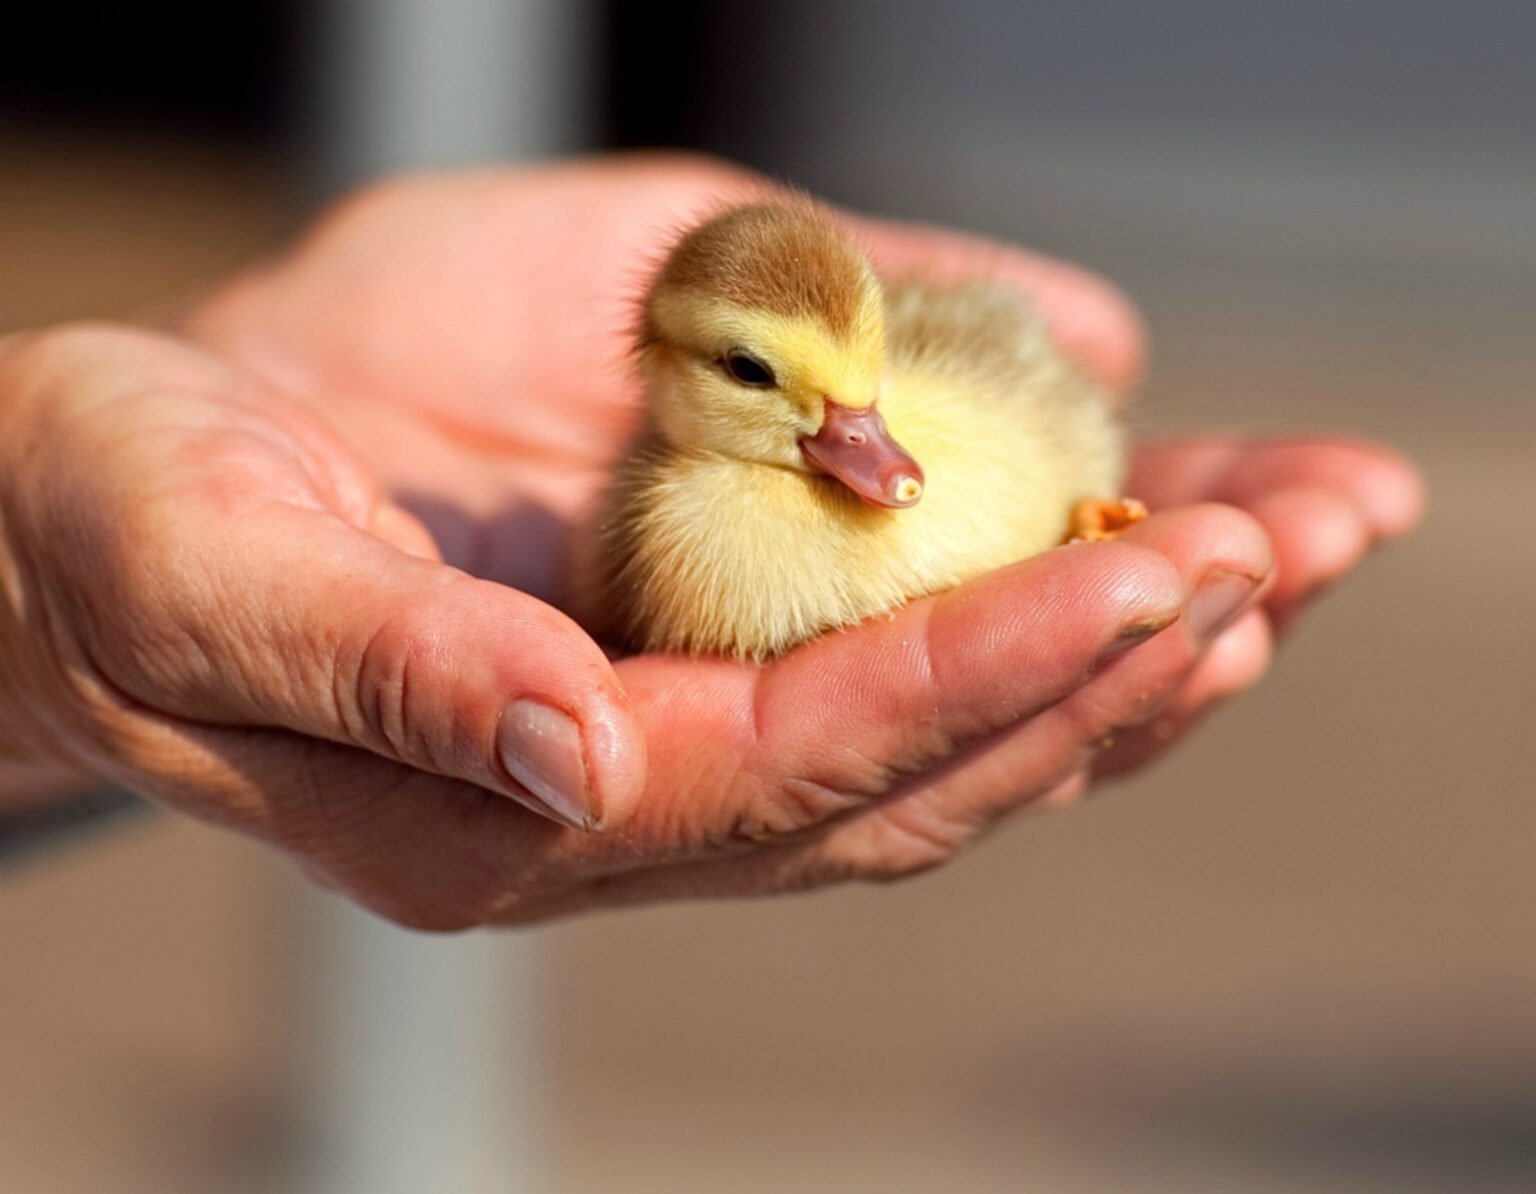 .Ever wondered what it would be like to have ducks as pets? Admire at all the cutest & most adorable duck photos we've found just for you here.